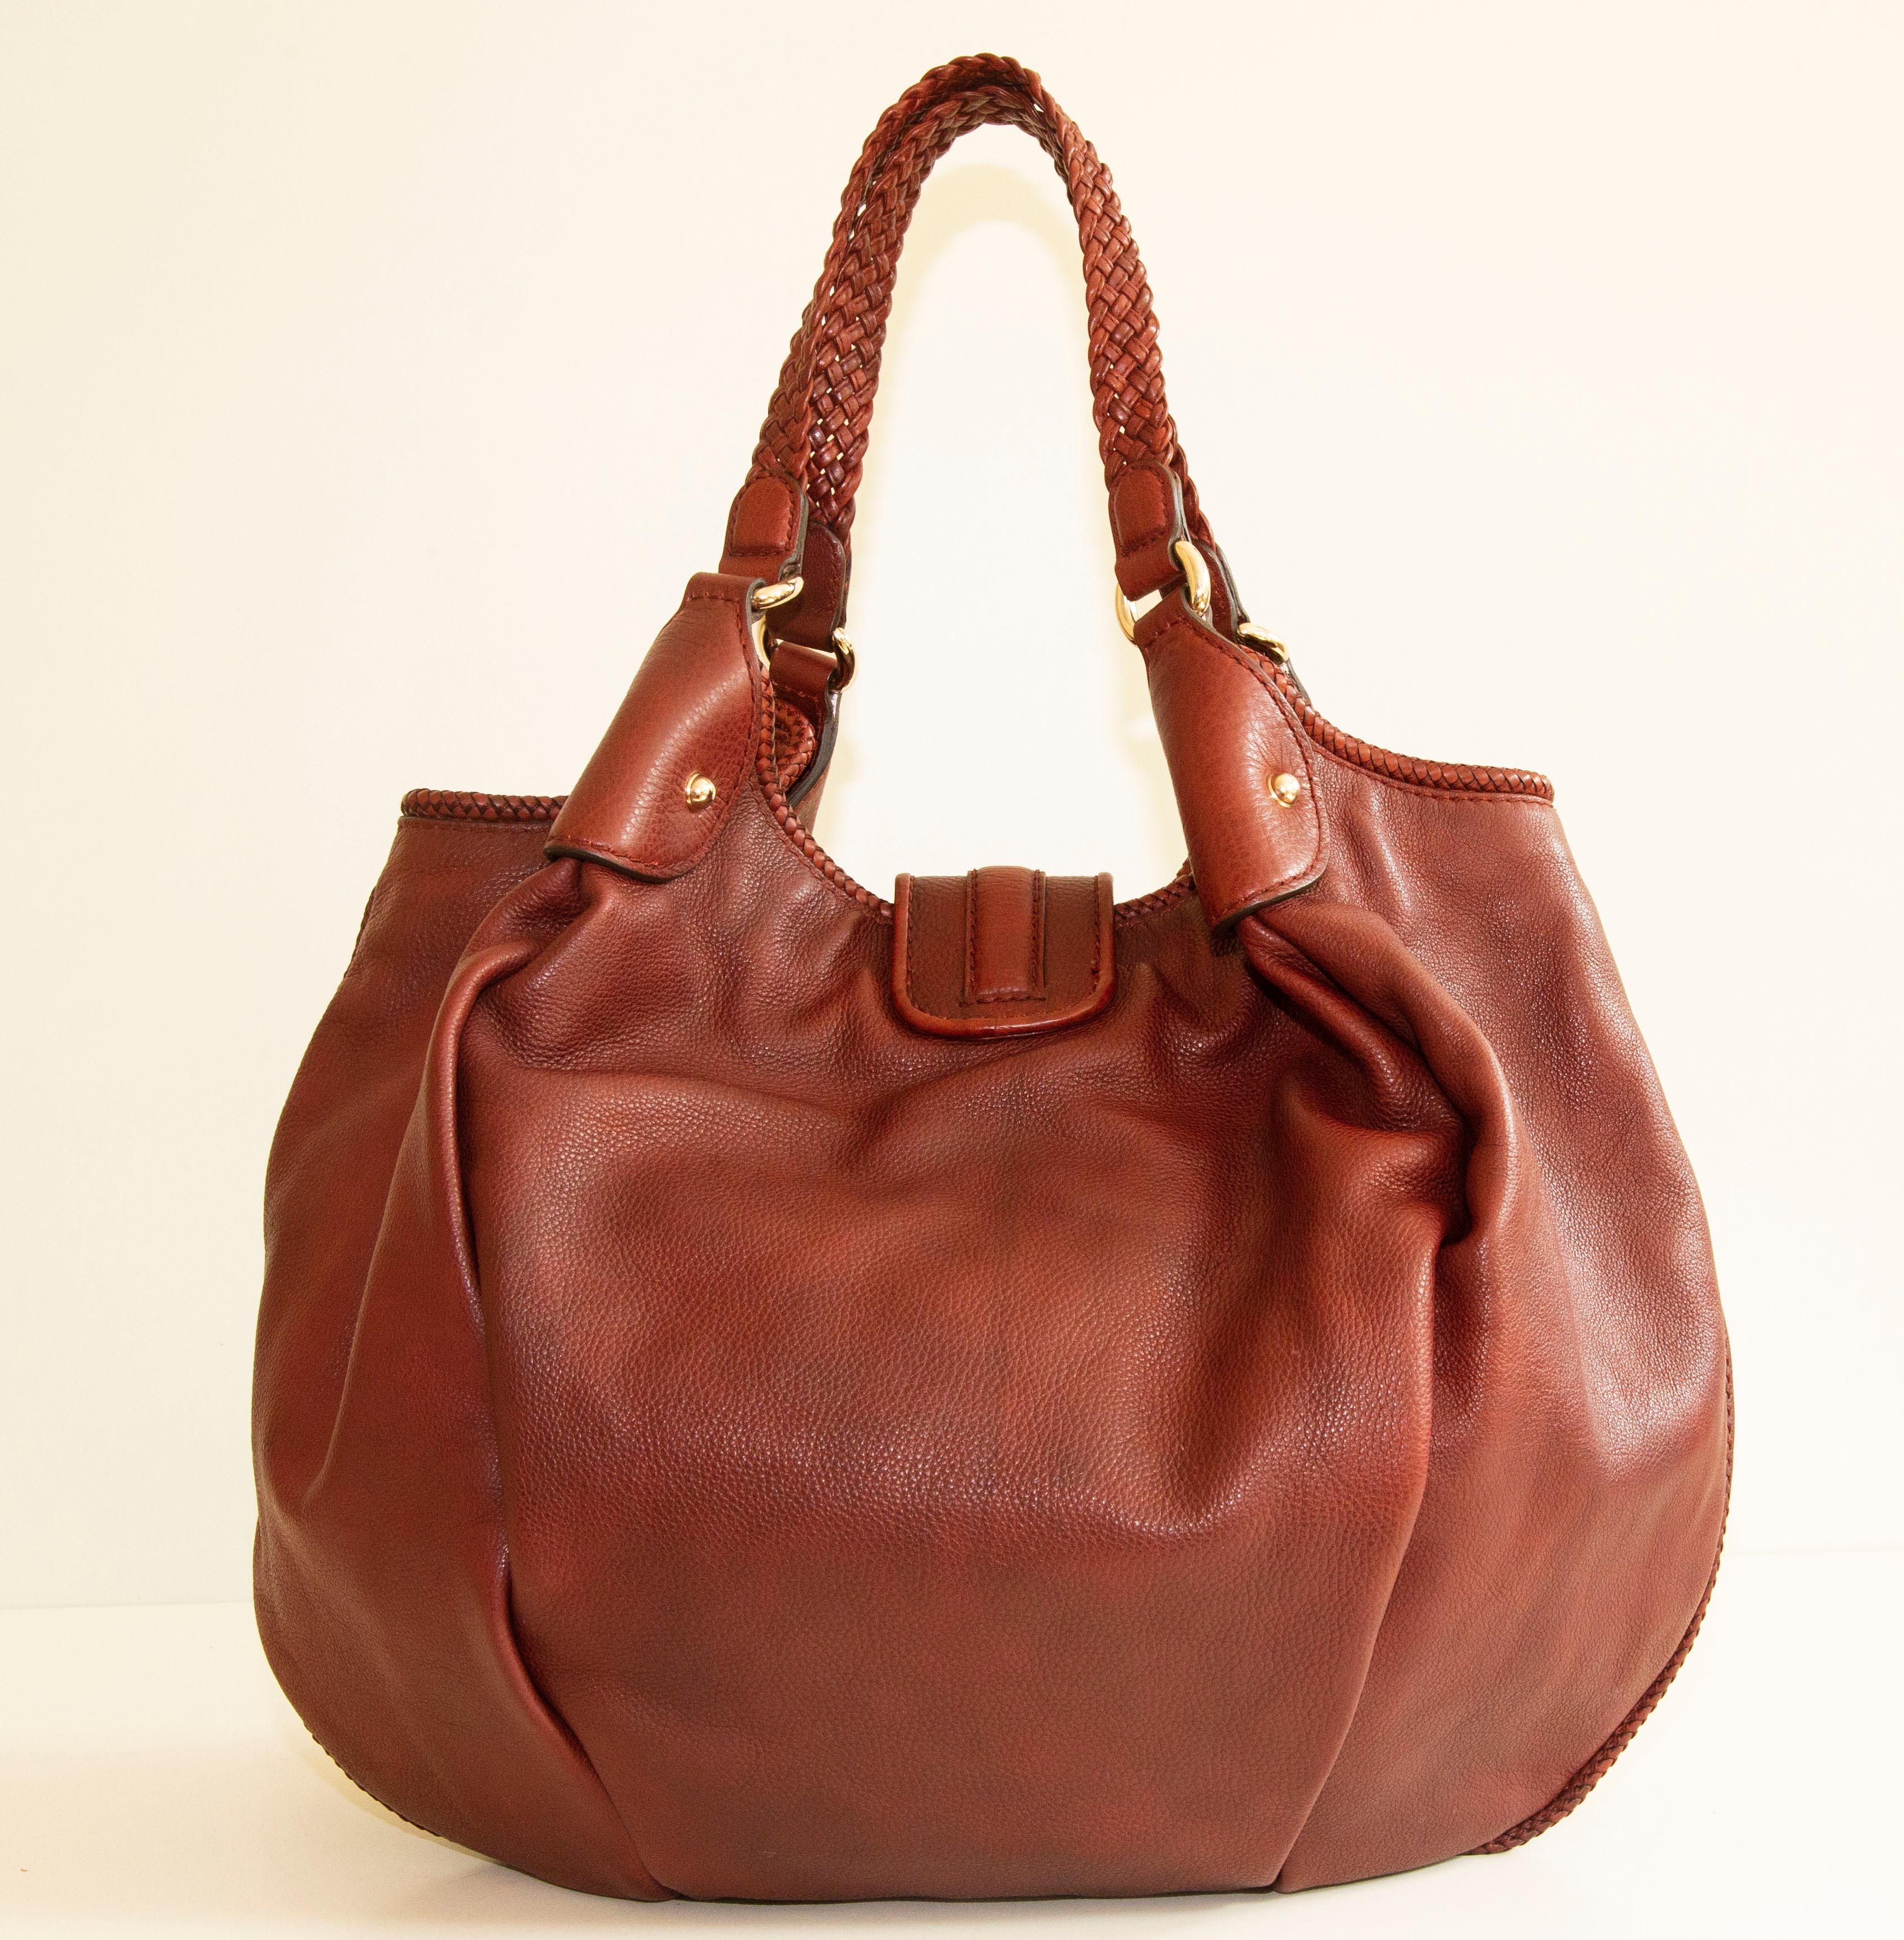 An authentic Gucci Marrakech hobo shoulder bag. The bag features an earth red leather exterior and gold-toned hardware. The interior is lined with beige fabric and there are three side pockets, one zipped pocket, and two slip pockets. The interior